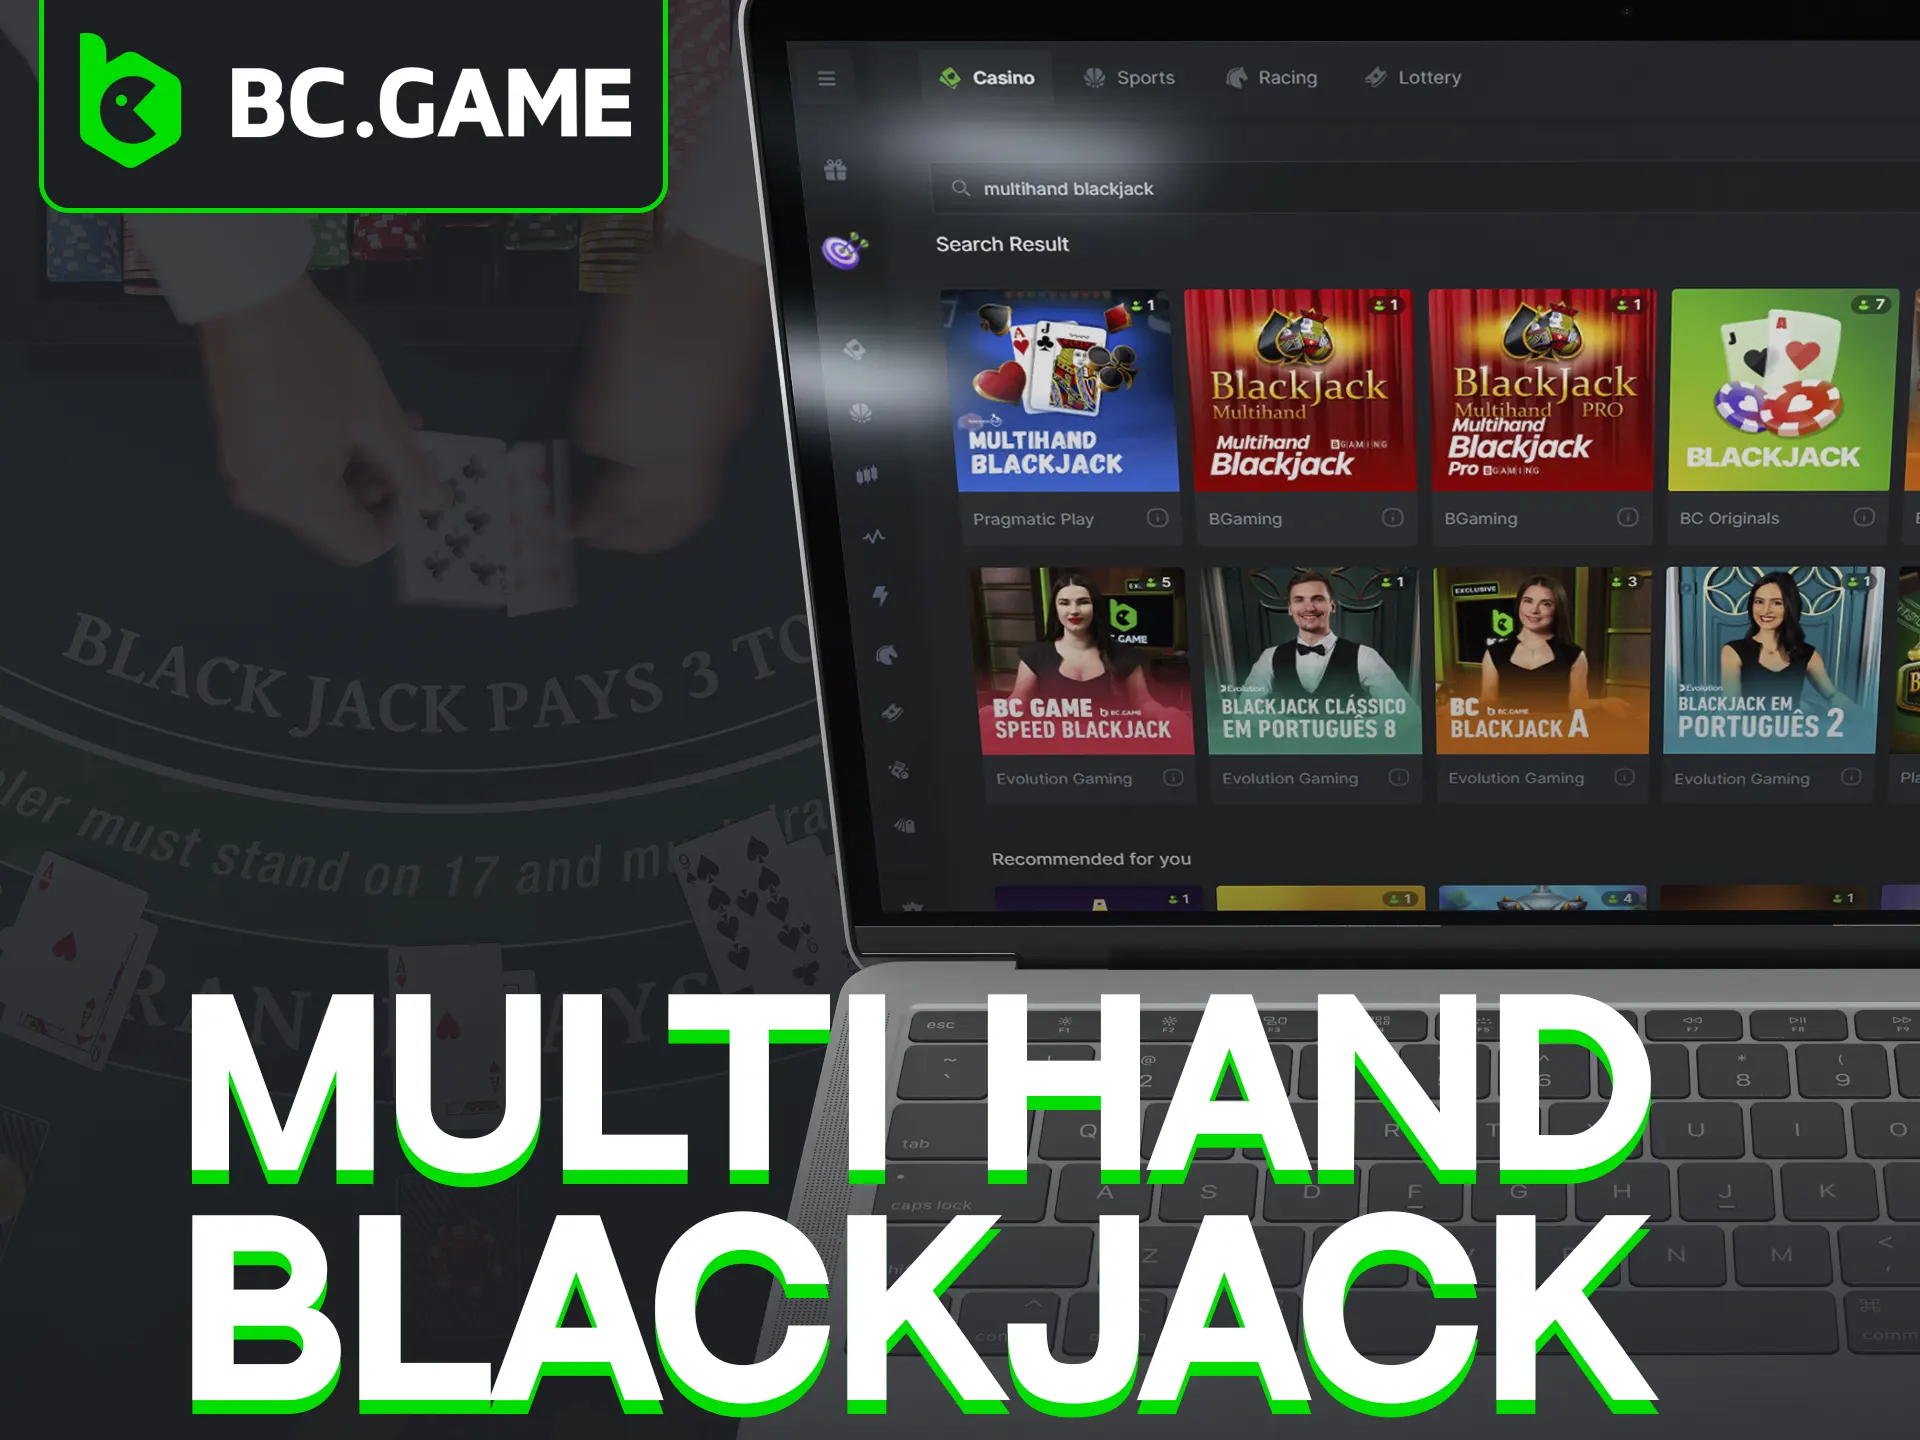 Play Multi Hand Blackjack at BC Game for increased profits.